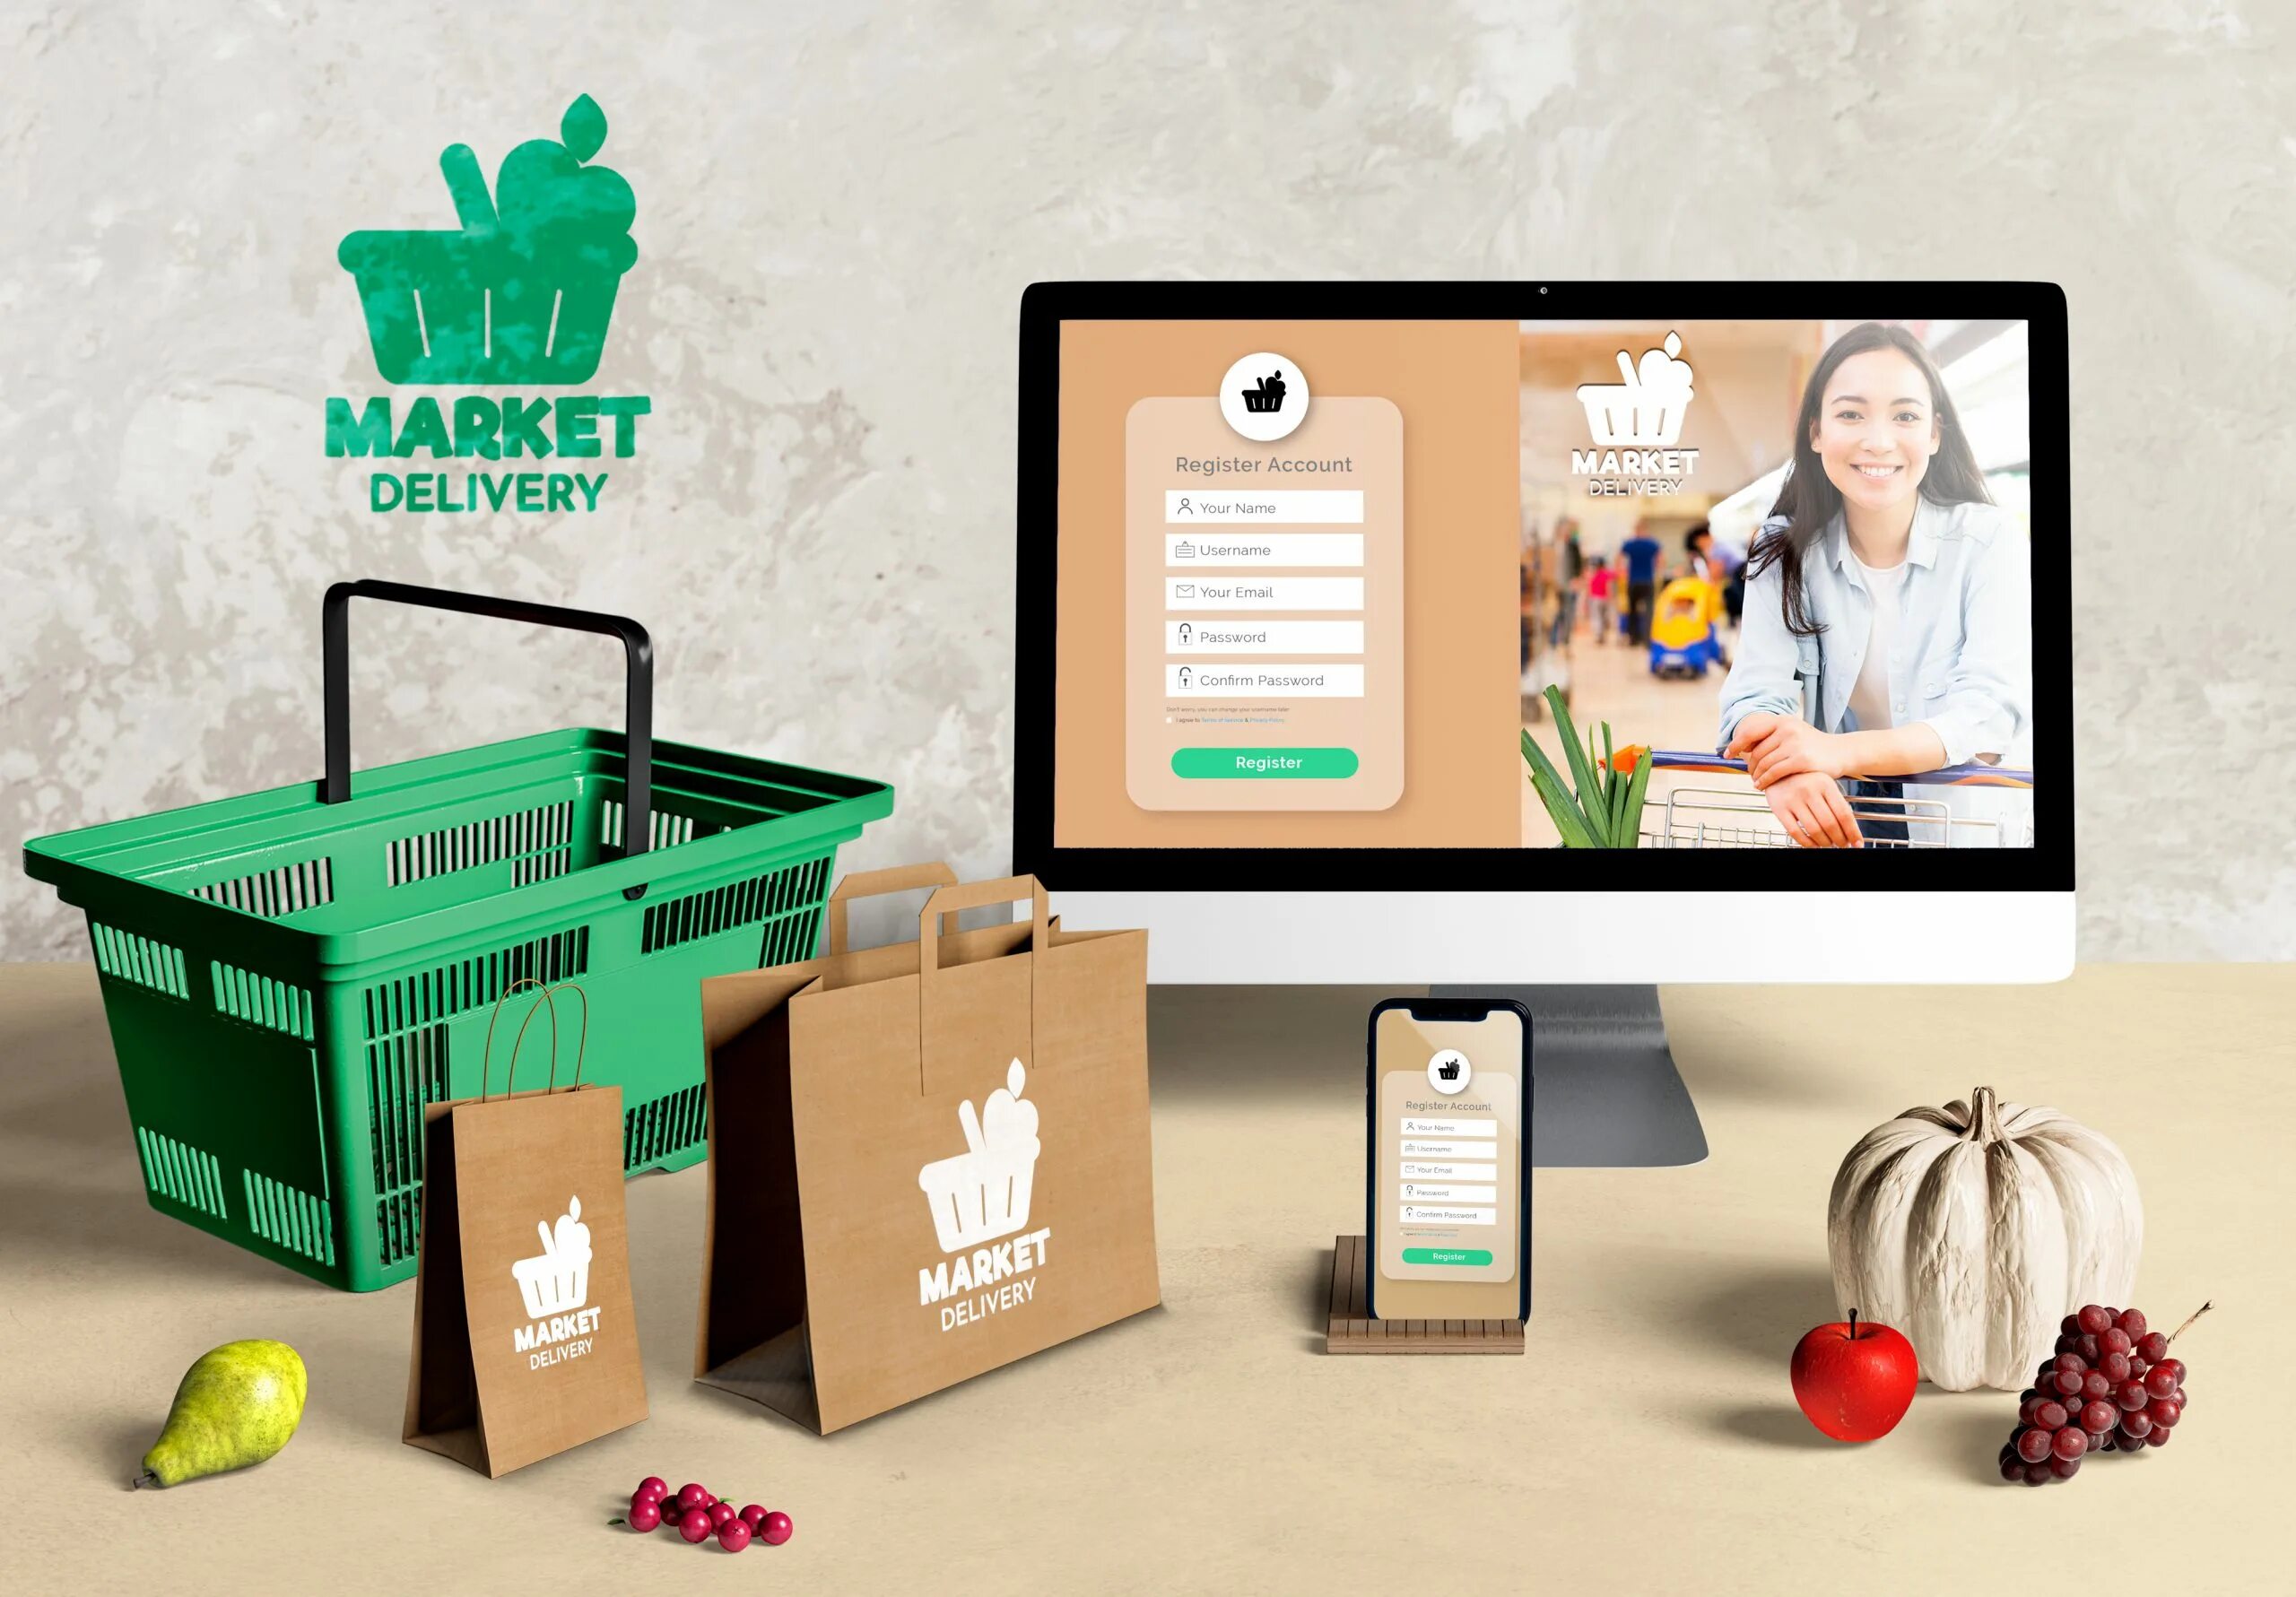 Маркет доставка по клику. Delivery Market. E-grocery. Grocery delivery software.